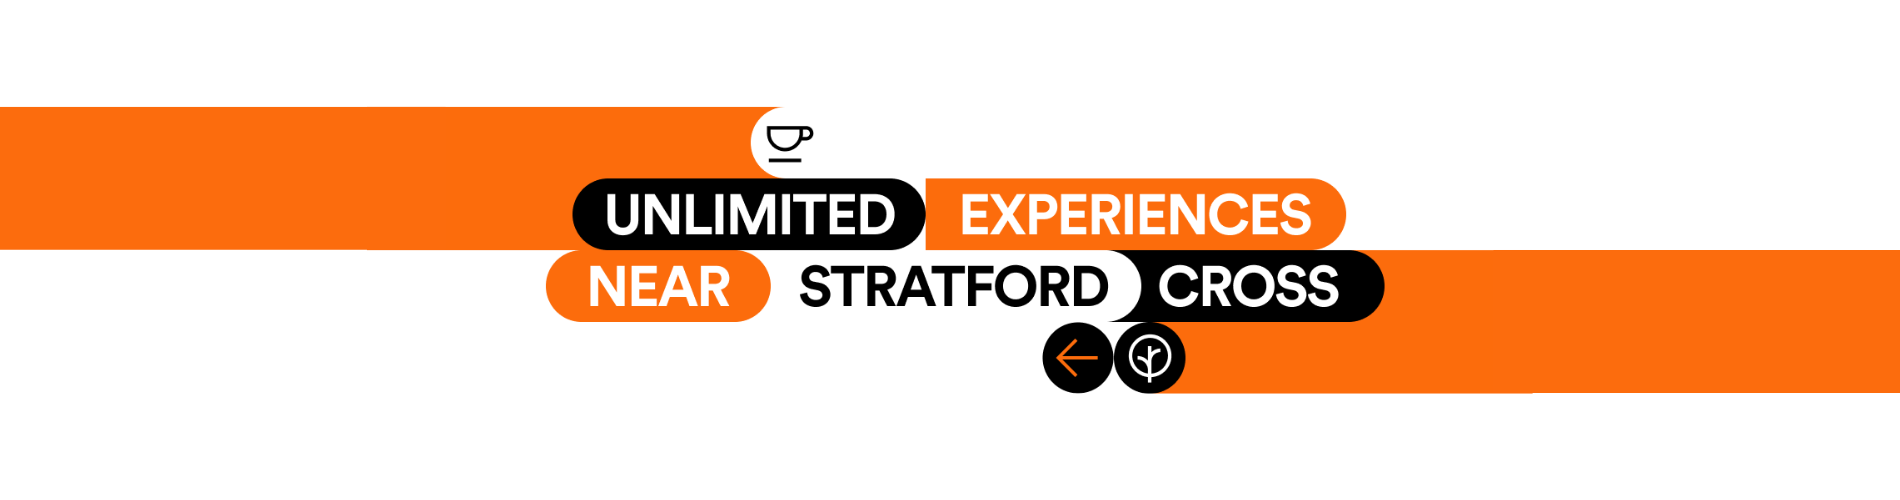 unlimited experience - 1900x500.png